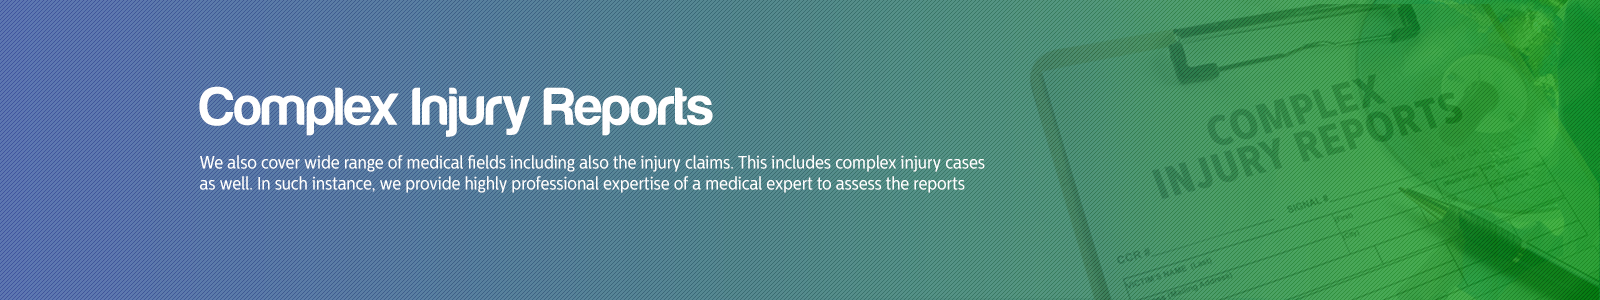 Complex Injury Reports_inner pages Banner